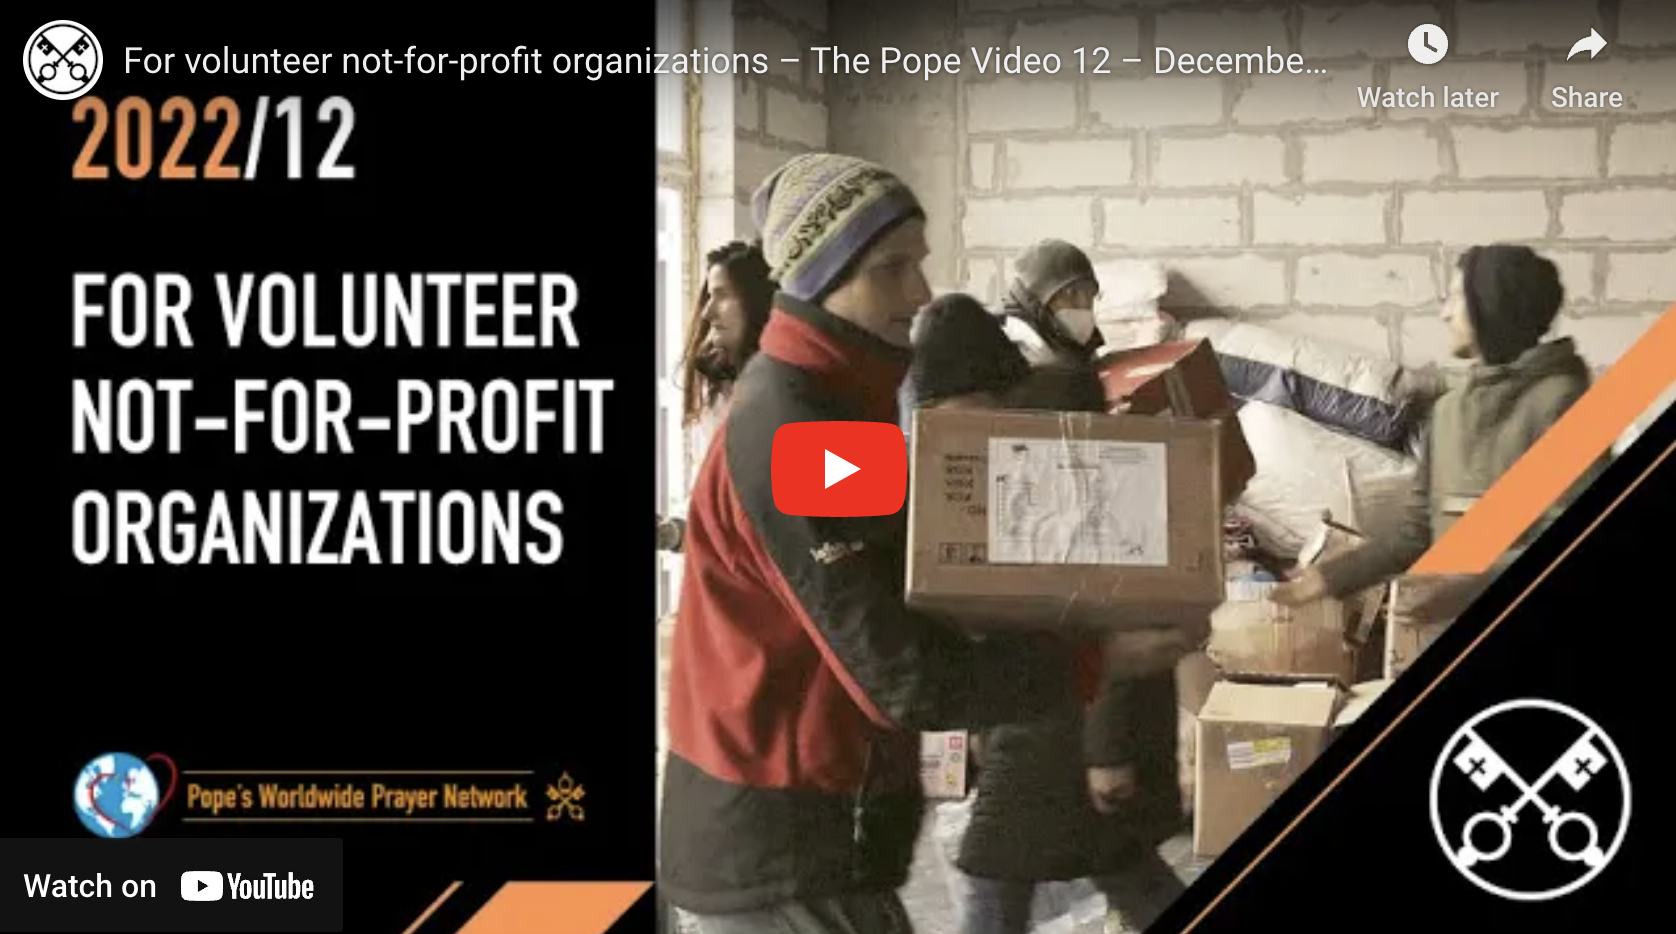 For volunteer not-for-profit organizations – The Pope Video